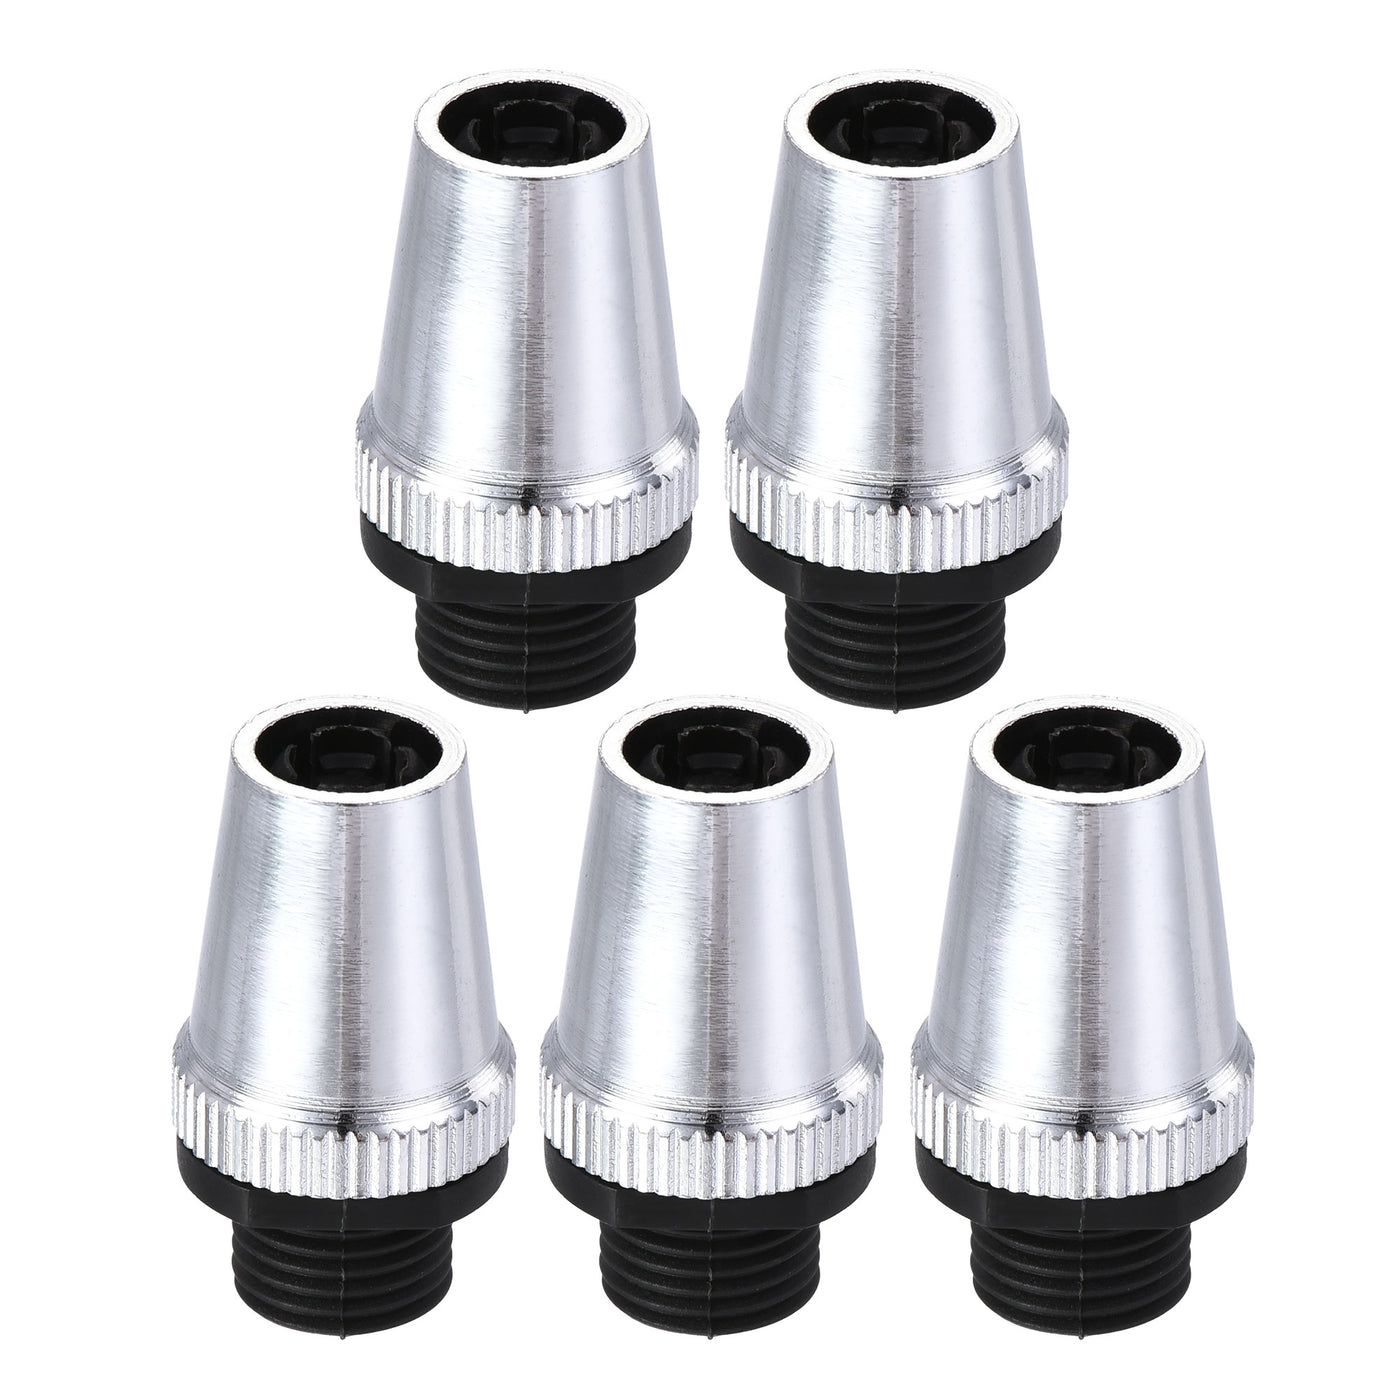 uxcell Uxcell Cable Glands Strain Relief Cord Grips Metal Chrome 5Pcs for Wiring Hanging Light Ceiling Pendant Lamp